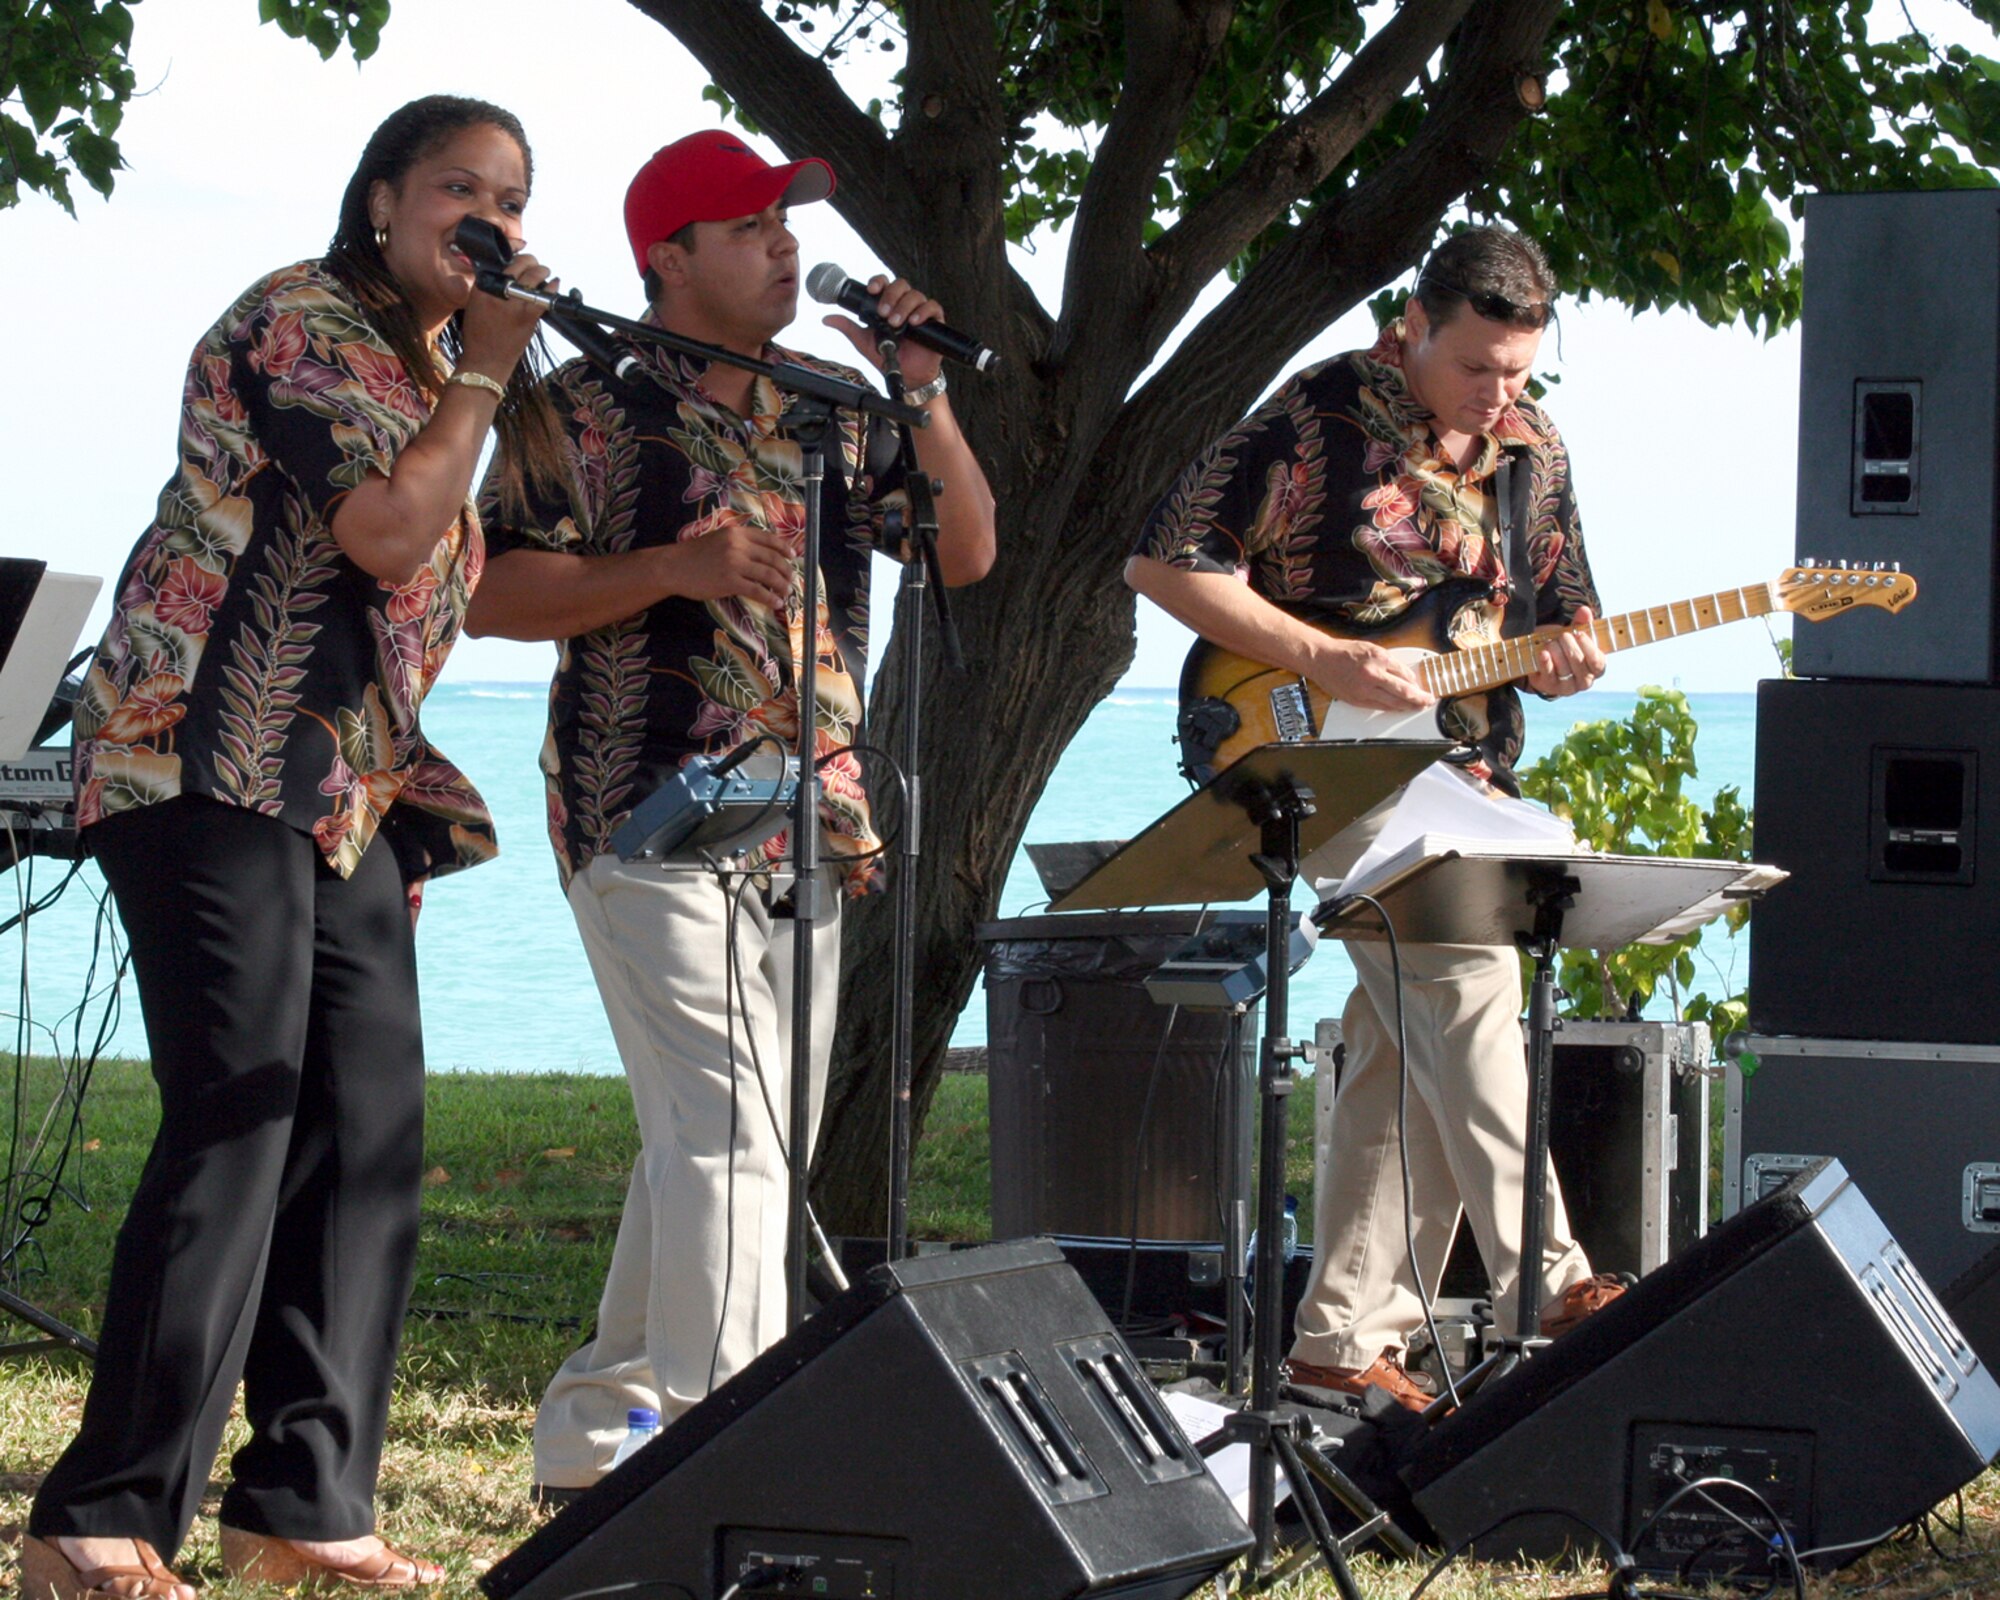 HICKAM AIR FORCE BASE, Hawaii – U.S. Air Force Staff Sergeant Tamiko Boone, vocalist, Staff Sergeant Rickard Vasquez Jr., vocalist, and Staff Sergeant Gregory S. Lacy, guitarist,  members of the Air Force Band of the Pacific, ‘Hana Hou’, perform here May 18 during a concert hosted by Col. J.J. Torres, 15th Airlift Wing commander.  Hana Hou’s performances delight military and civilian audiences throughout Hawaii and the Pacific.  (US Air Force photo/ Master Sgt. Cherie McNeill)  